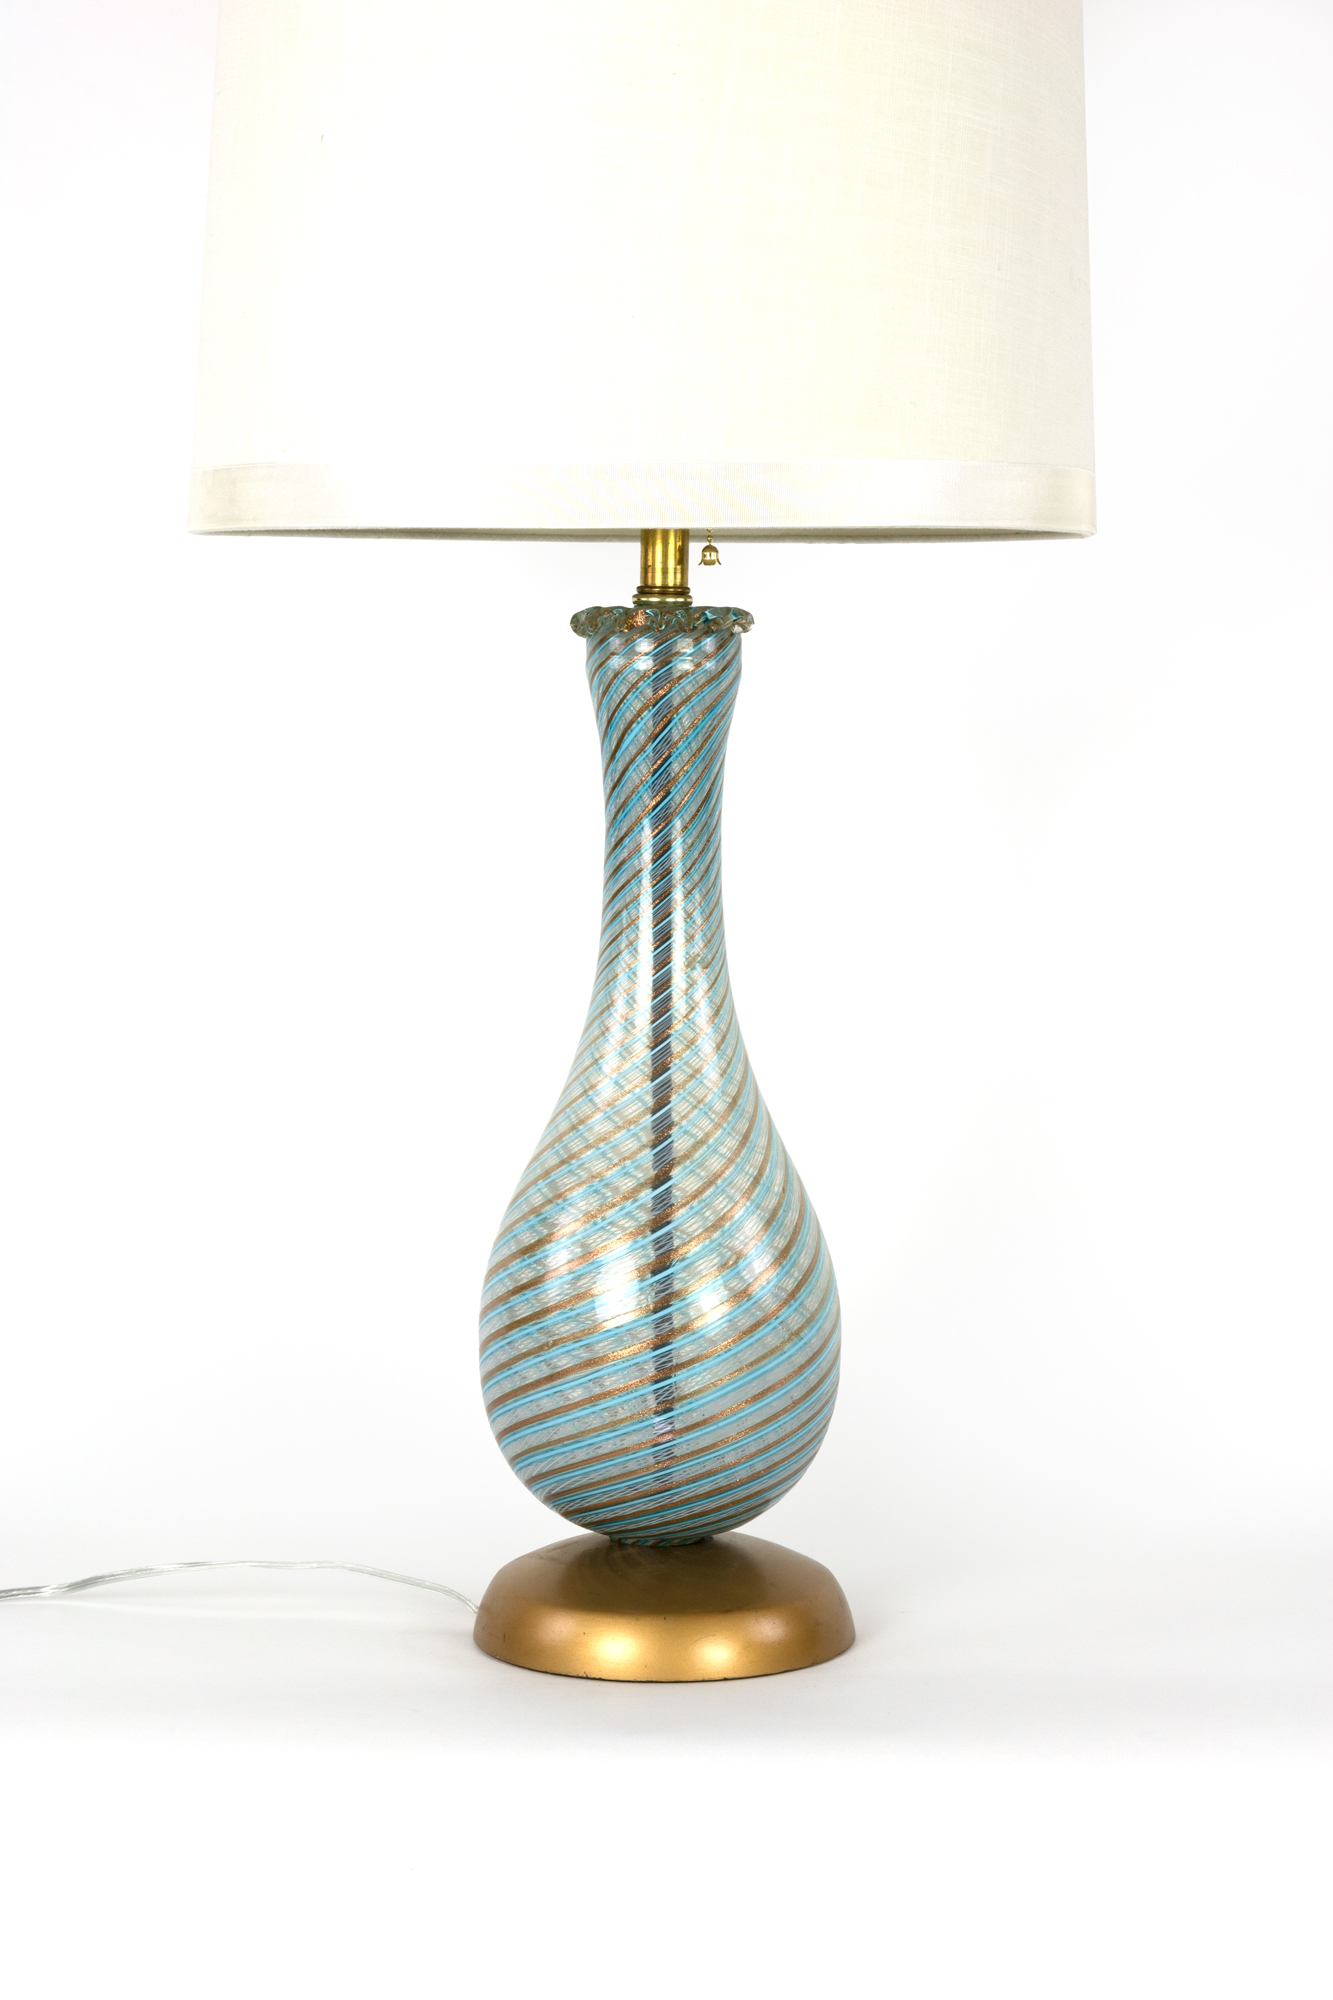 Details about   Vintage swirled glass Lamp Arm 